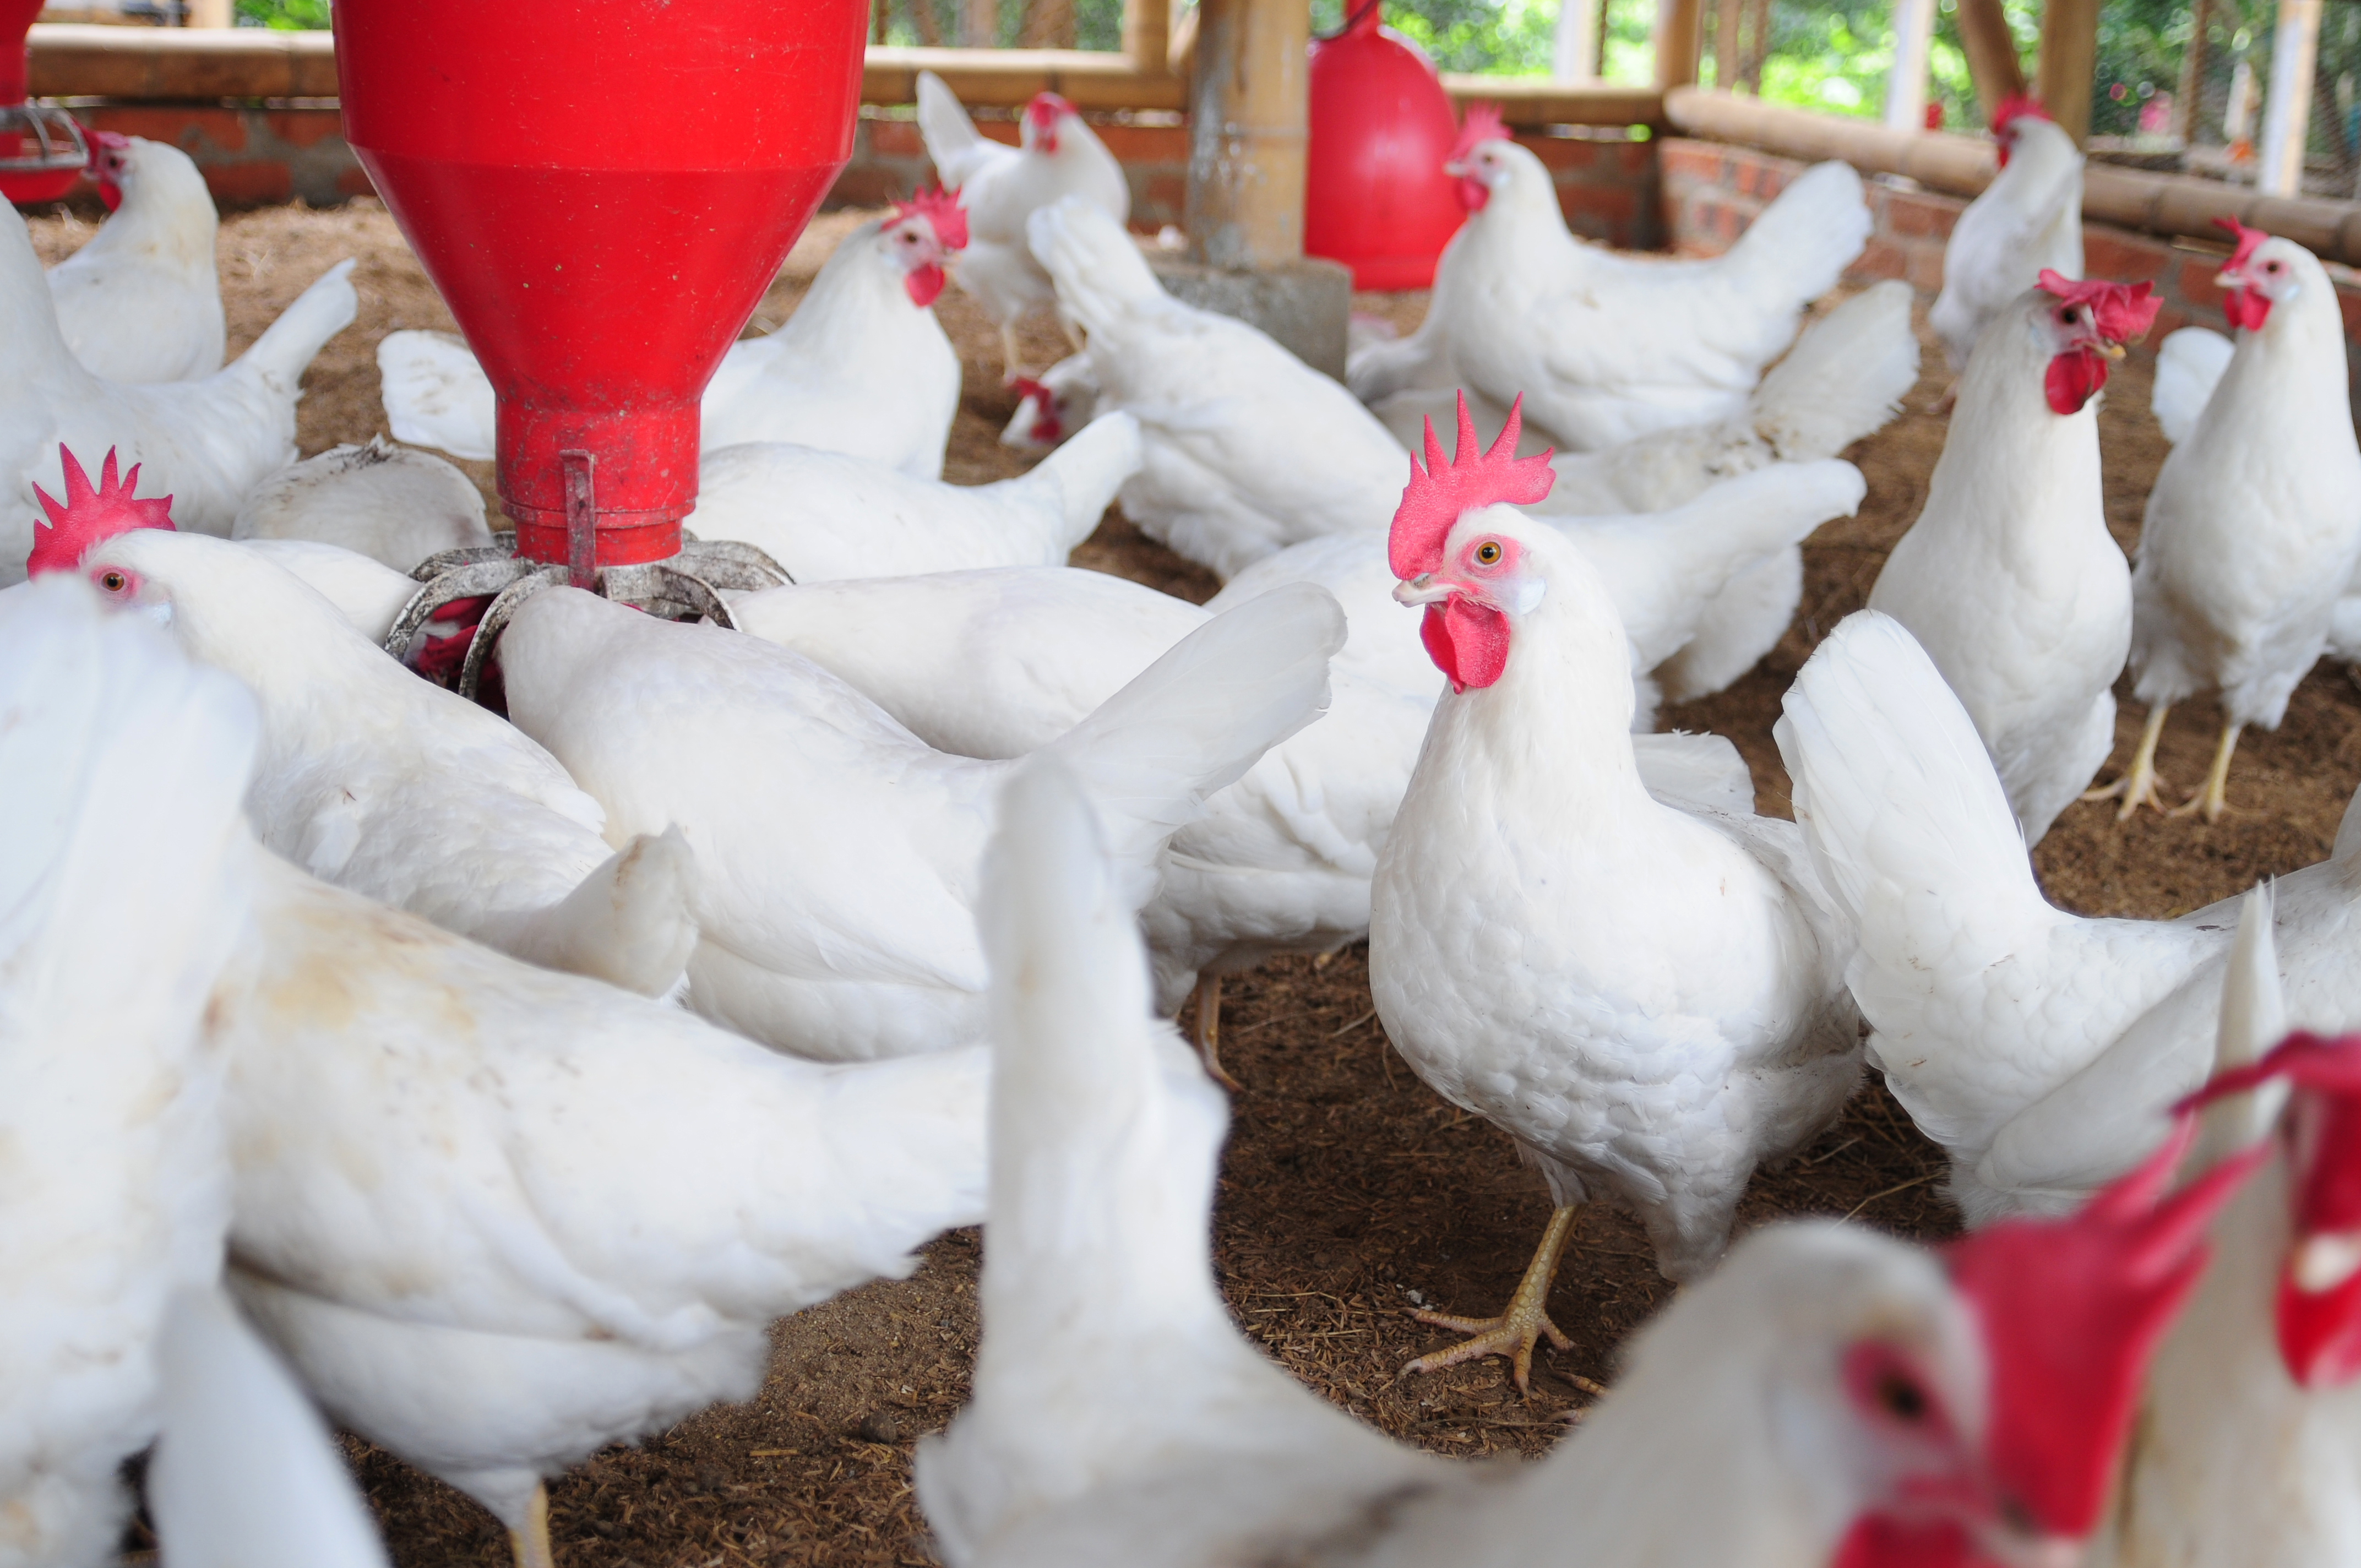 Monitoring chicken flock behaviour could help combat leading cause of food poisoning